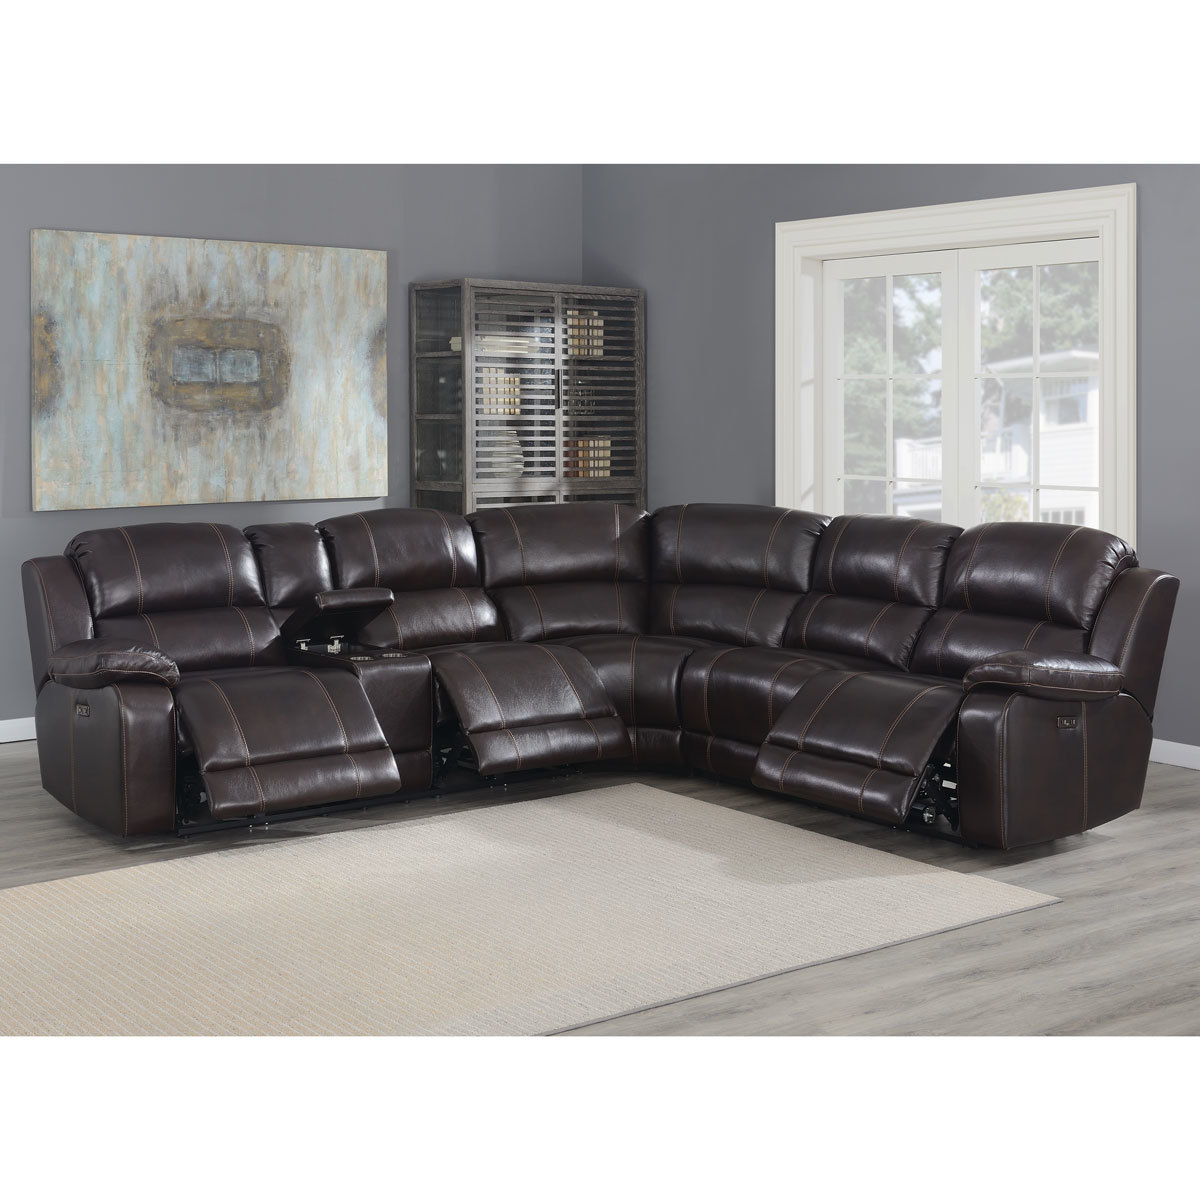 Pulaski Dunhill Brown Leather Power Reclining Sectional Sofa